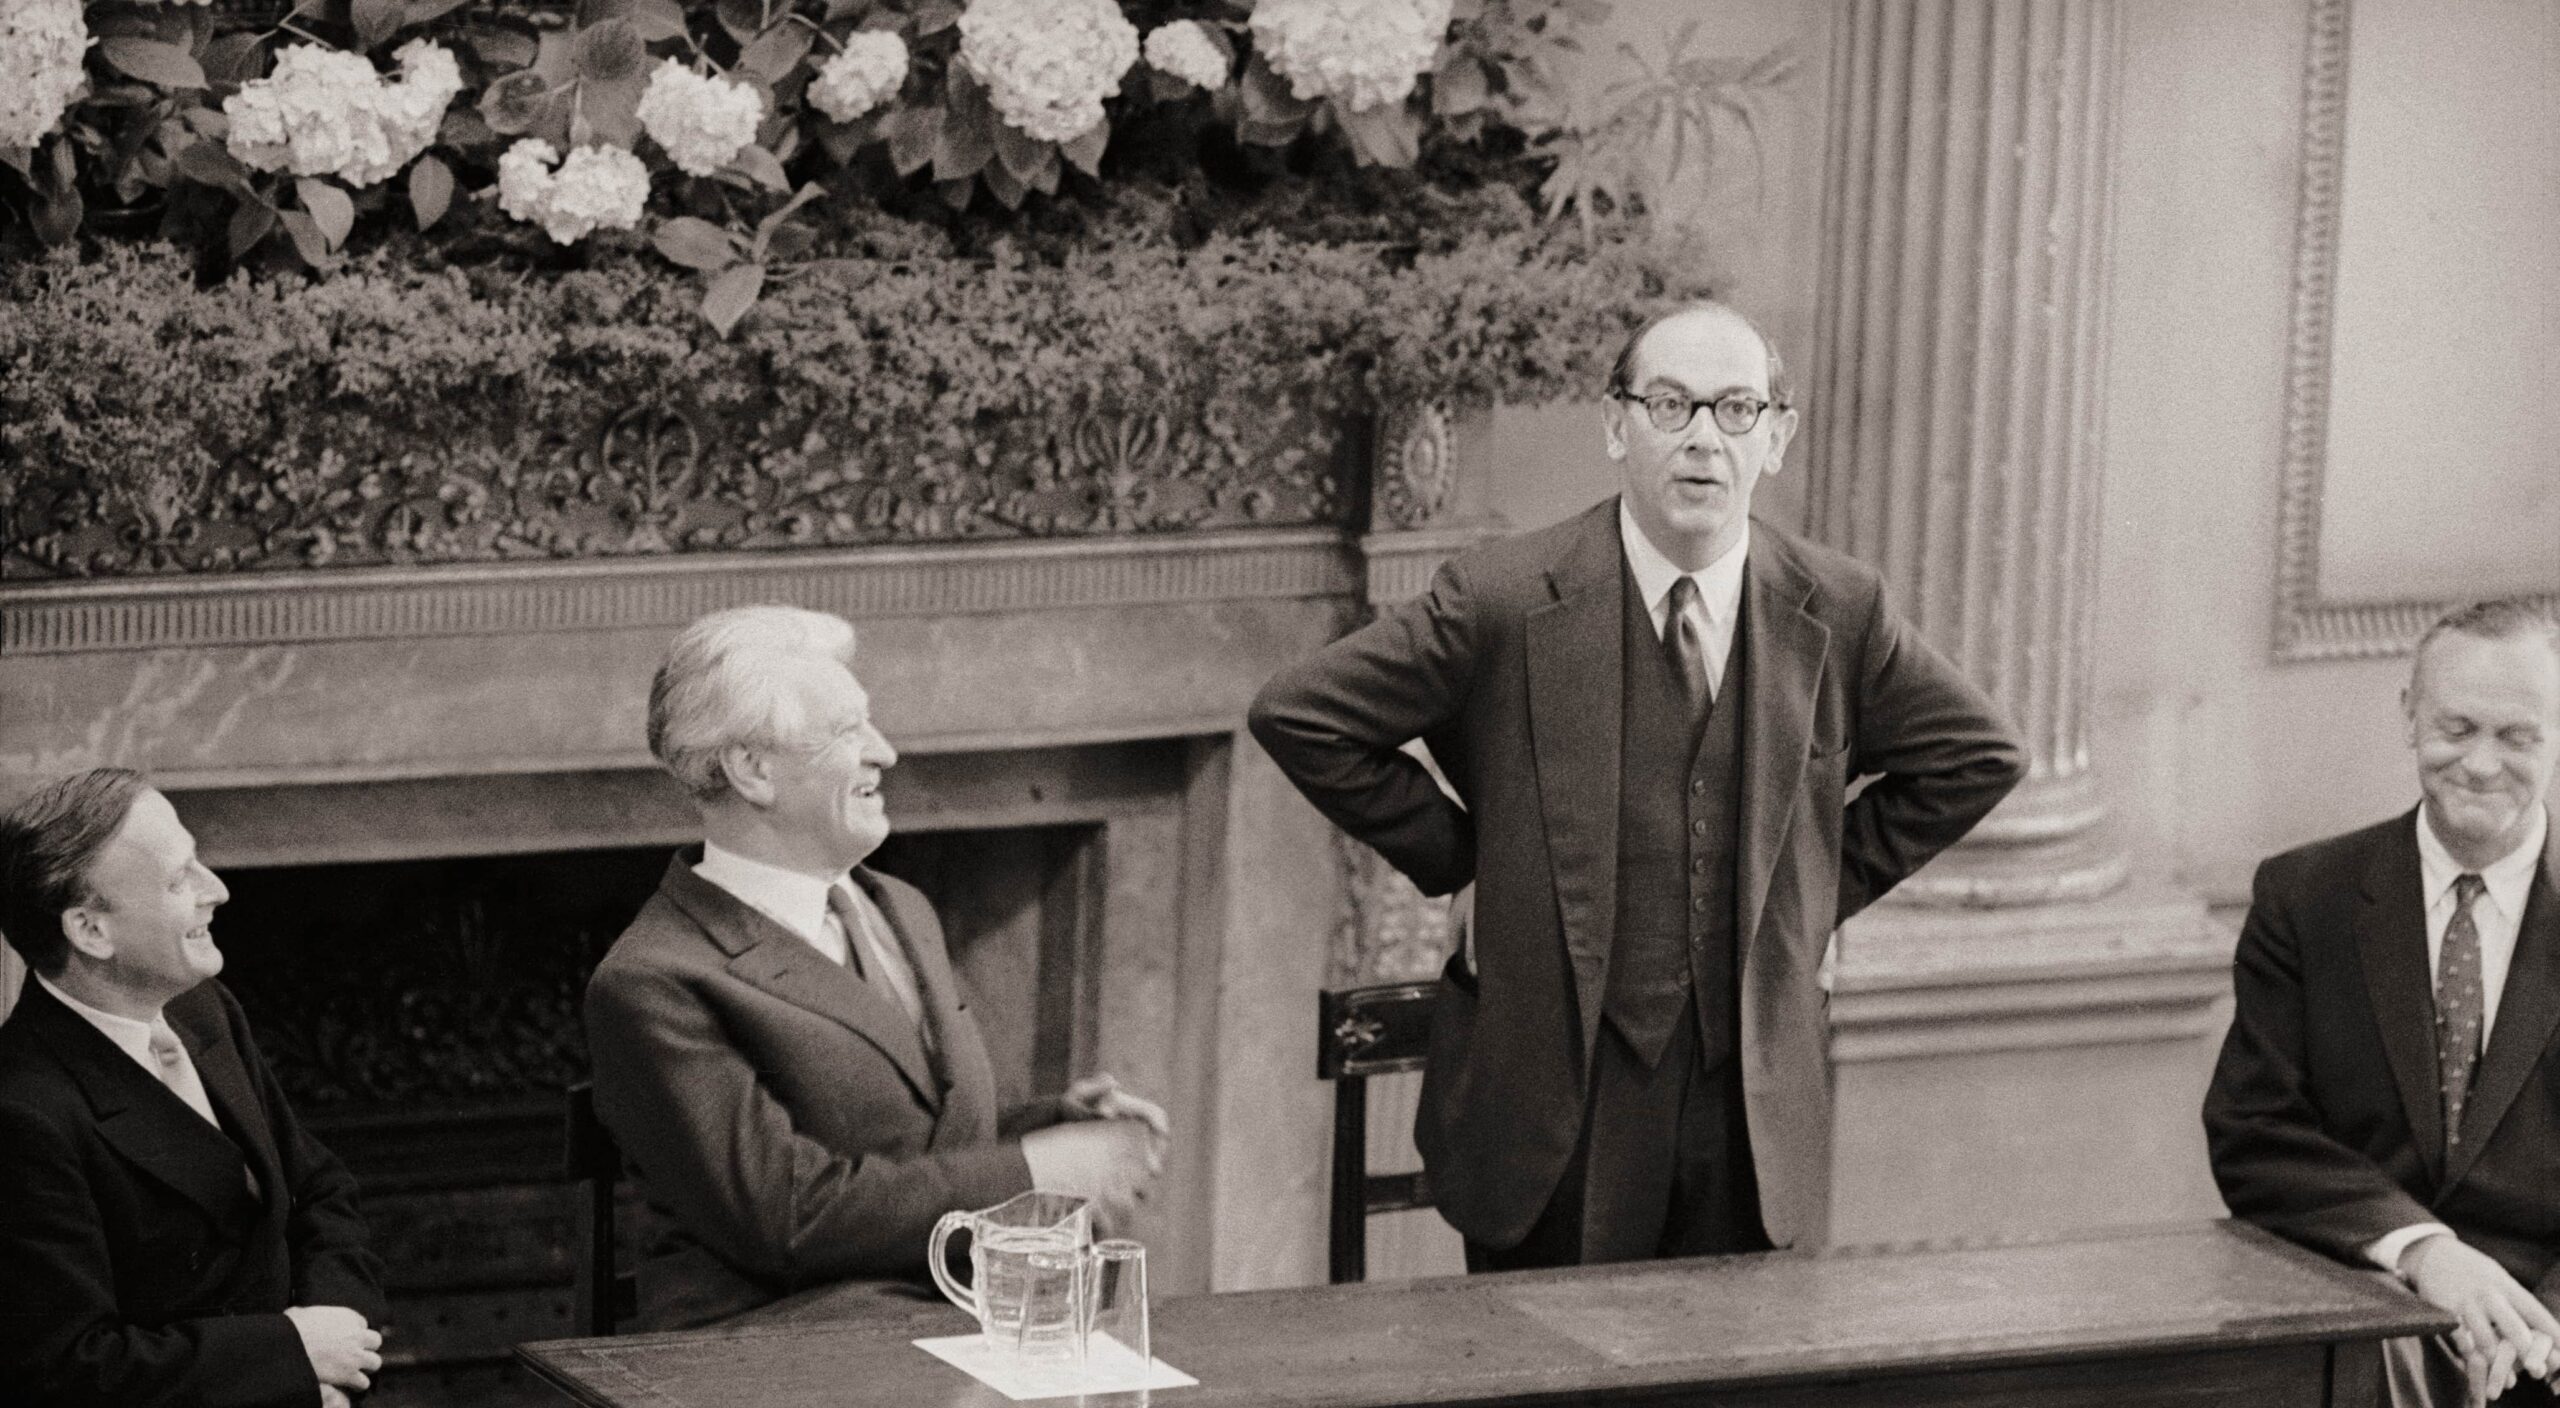 Isaiah Berlin (right) chairing a discussion at the Bath International Music Festival, June 1959 (Erich Auerbach / Stringer via Getty Images)